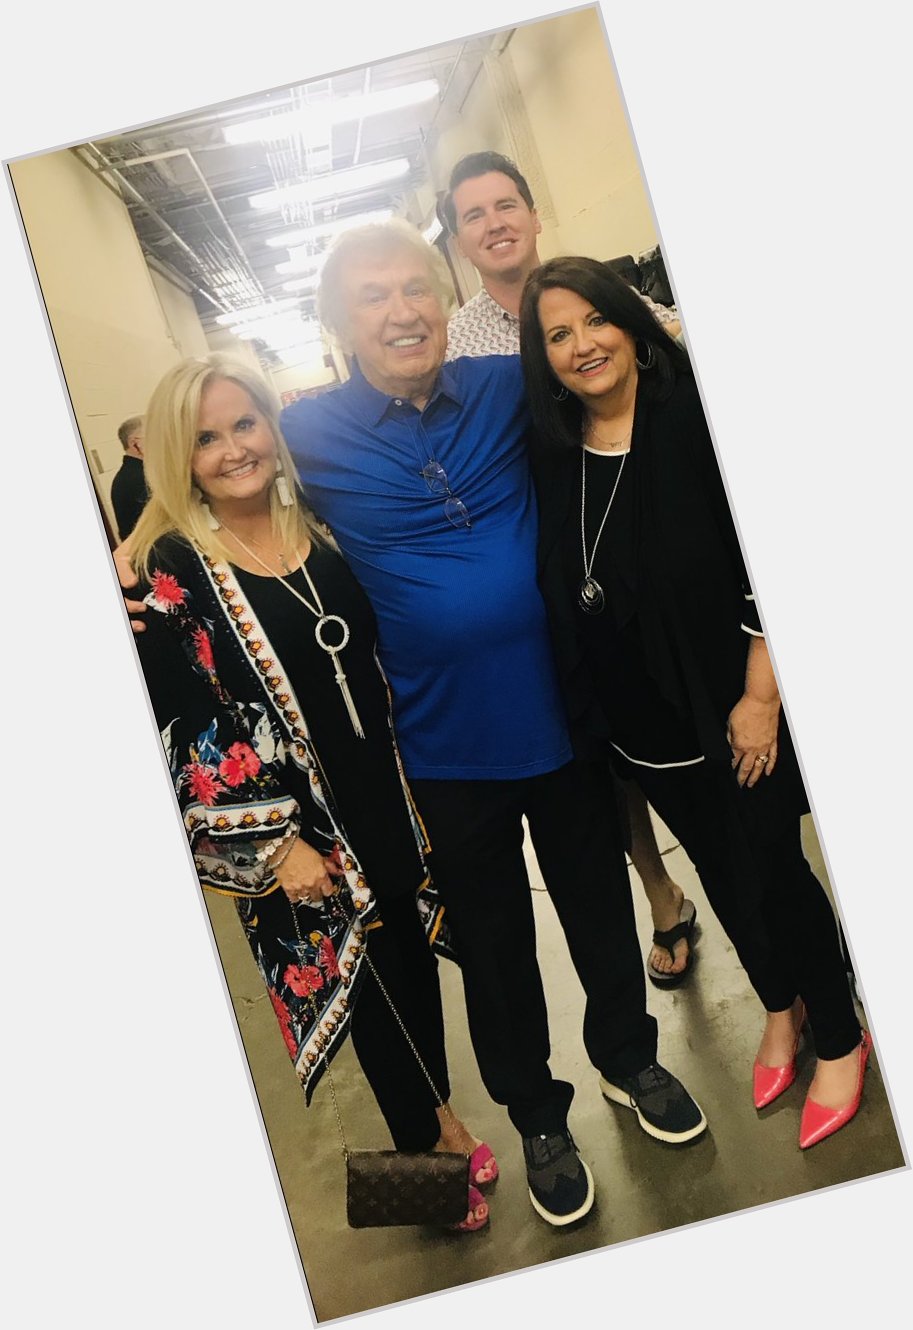 Happy 85th Birthday to this incredible role model! We love you Bill Gaither! 